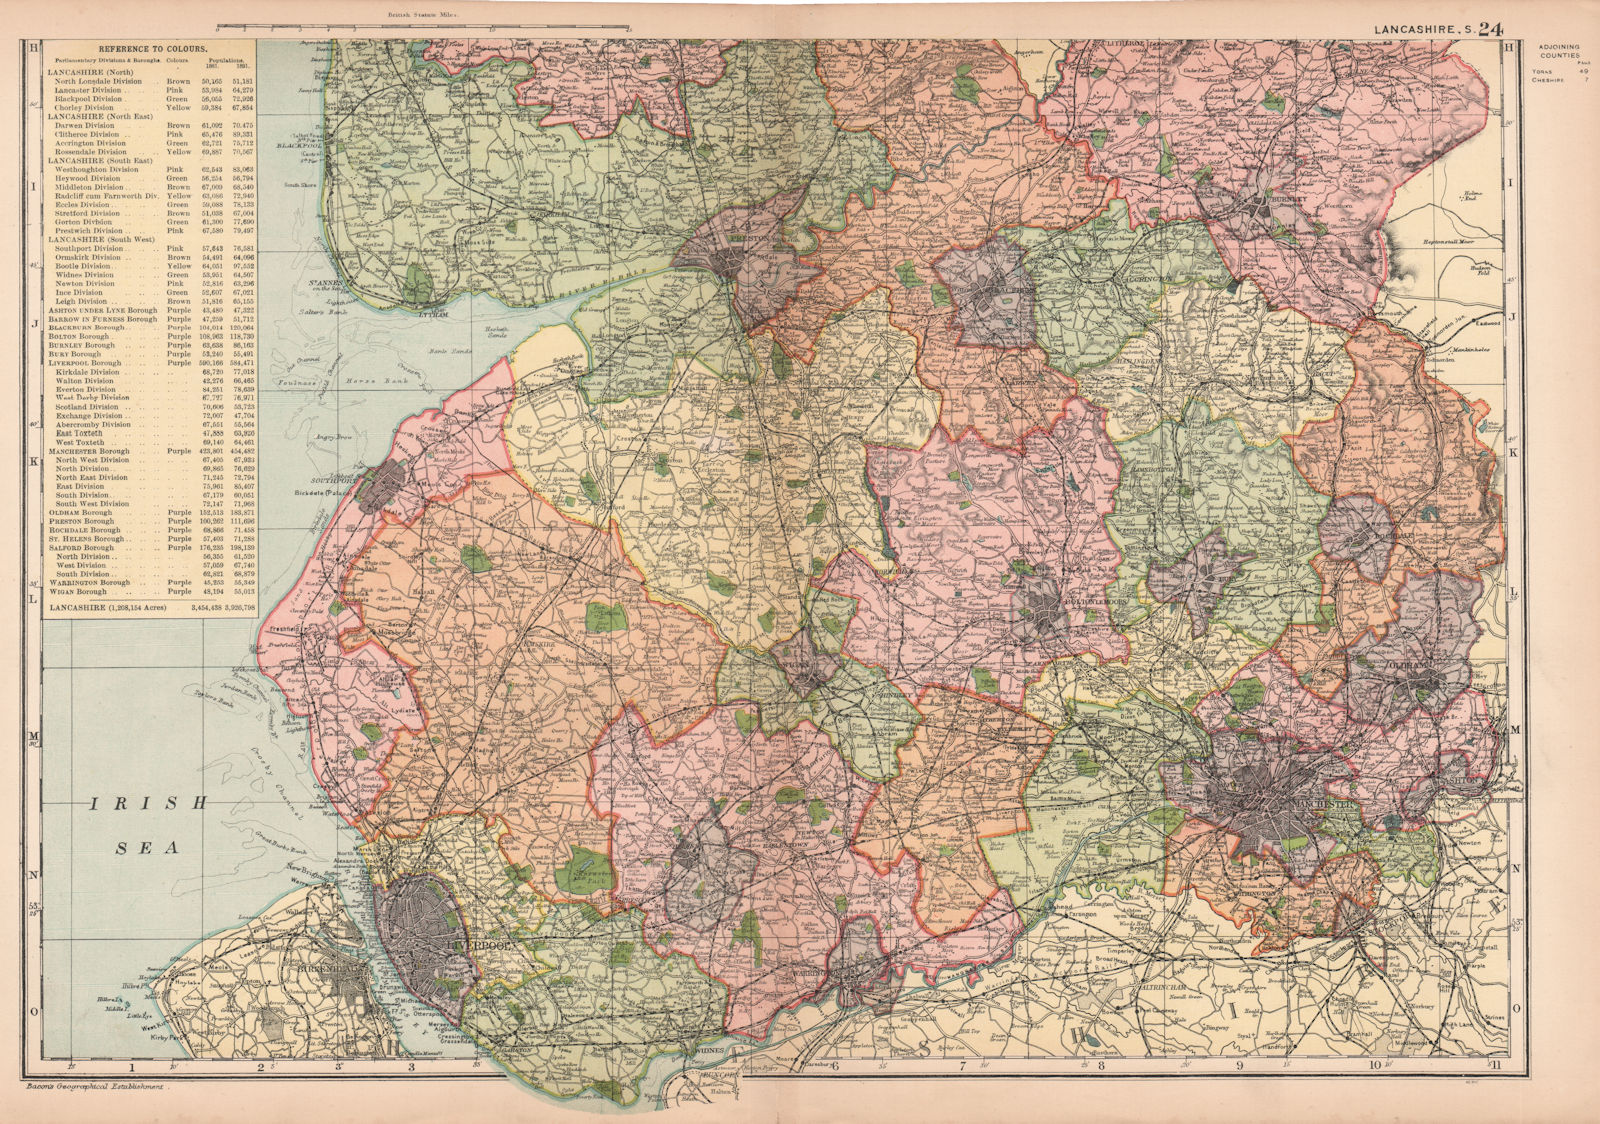 Associate Product LANCASHIRE (SOUTH). Showing Parliamentary divisions & parks. BACON 1901 map